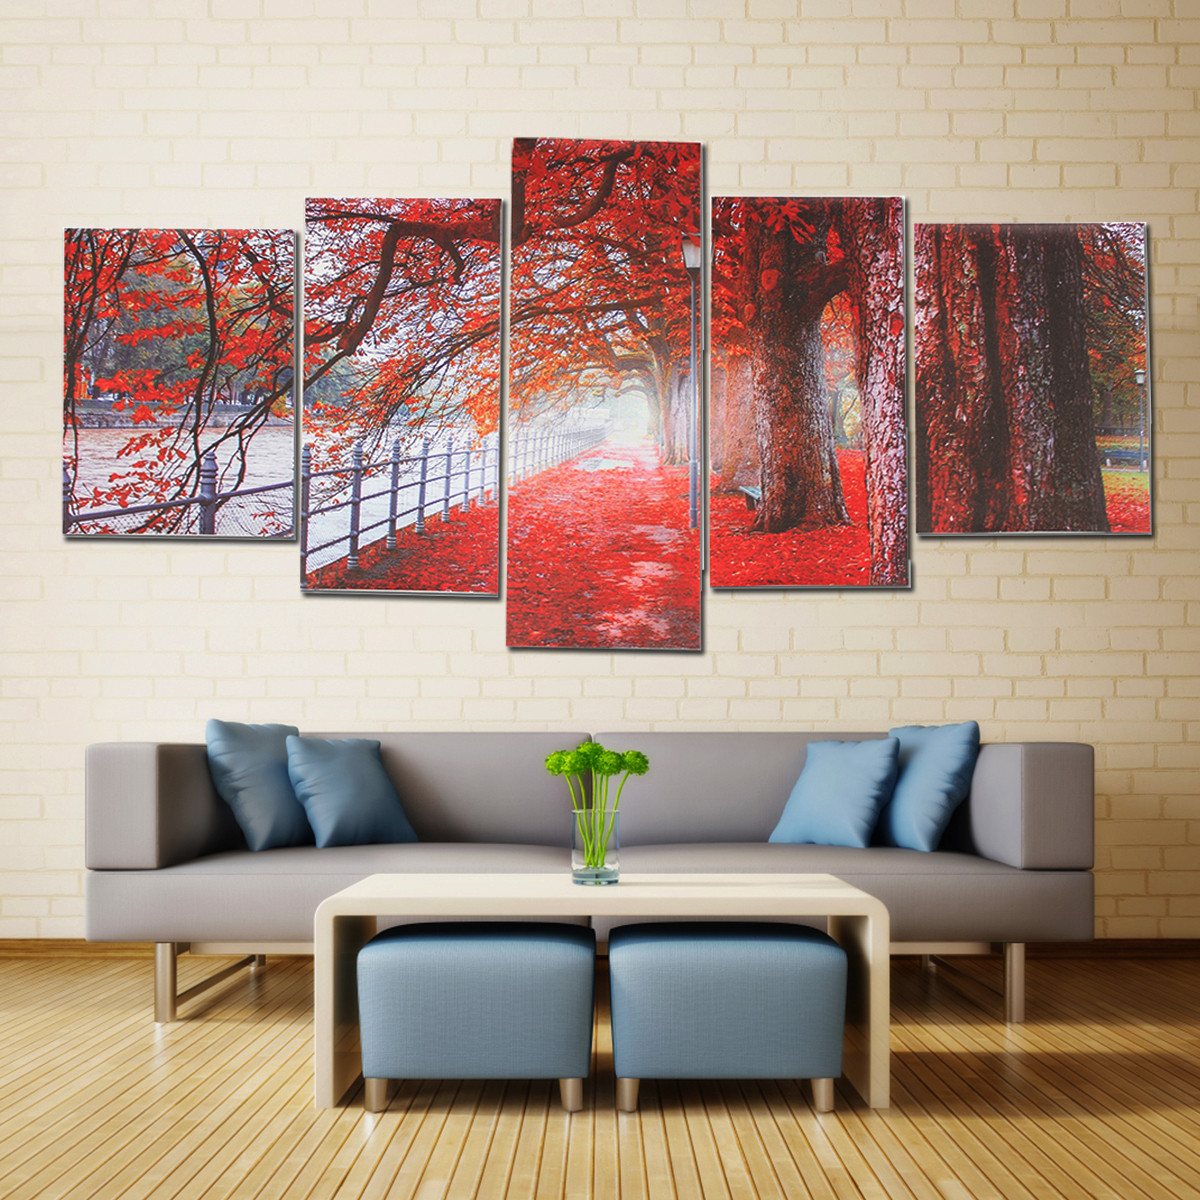 5Pcs-Red-Falling-Leaves-Canvas-Painting-Autumn-Tree-Wall-Decorative-Print-Art-Pictures-Unframed-Wall-1809936-2